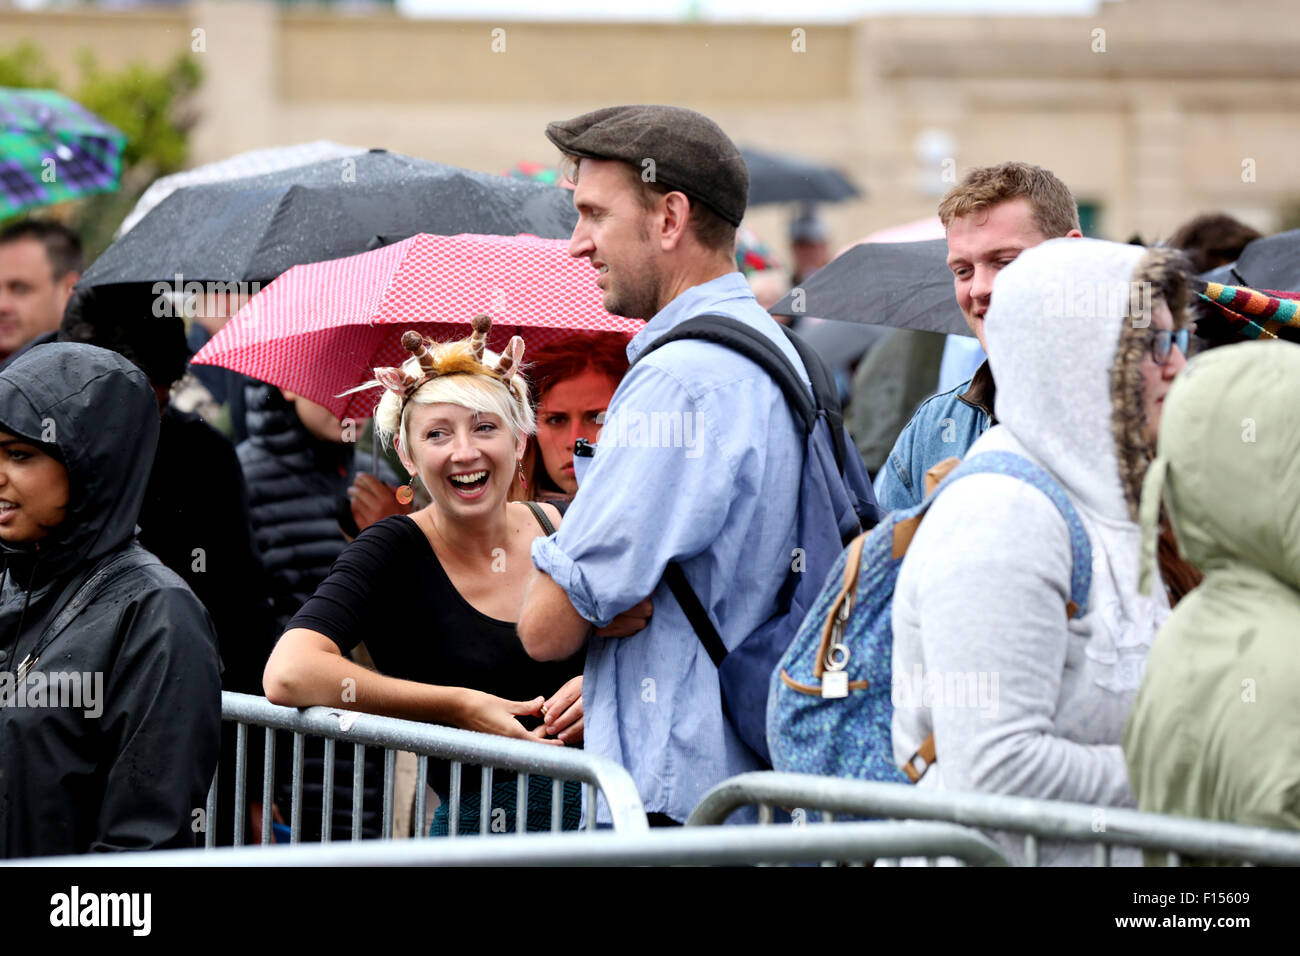 Weston-s-Mare, UK. 27th August 2015. People queuing for tickets for entry to the Banksy Dismaland Fun Park in Weston-s-Mare remain in high spirits. Despite the rain and just being told there were no more places available. Local Royalist Terry Hutt made his way around the crowds keeping them entertained. Credit:  Stephen Hyde/Alamy Live News Stock Photo